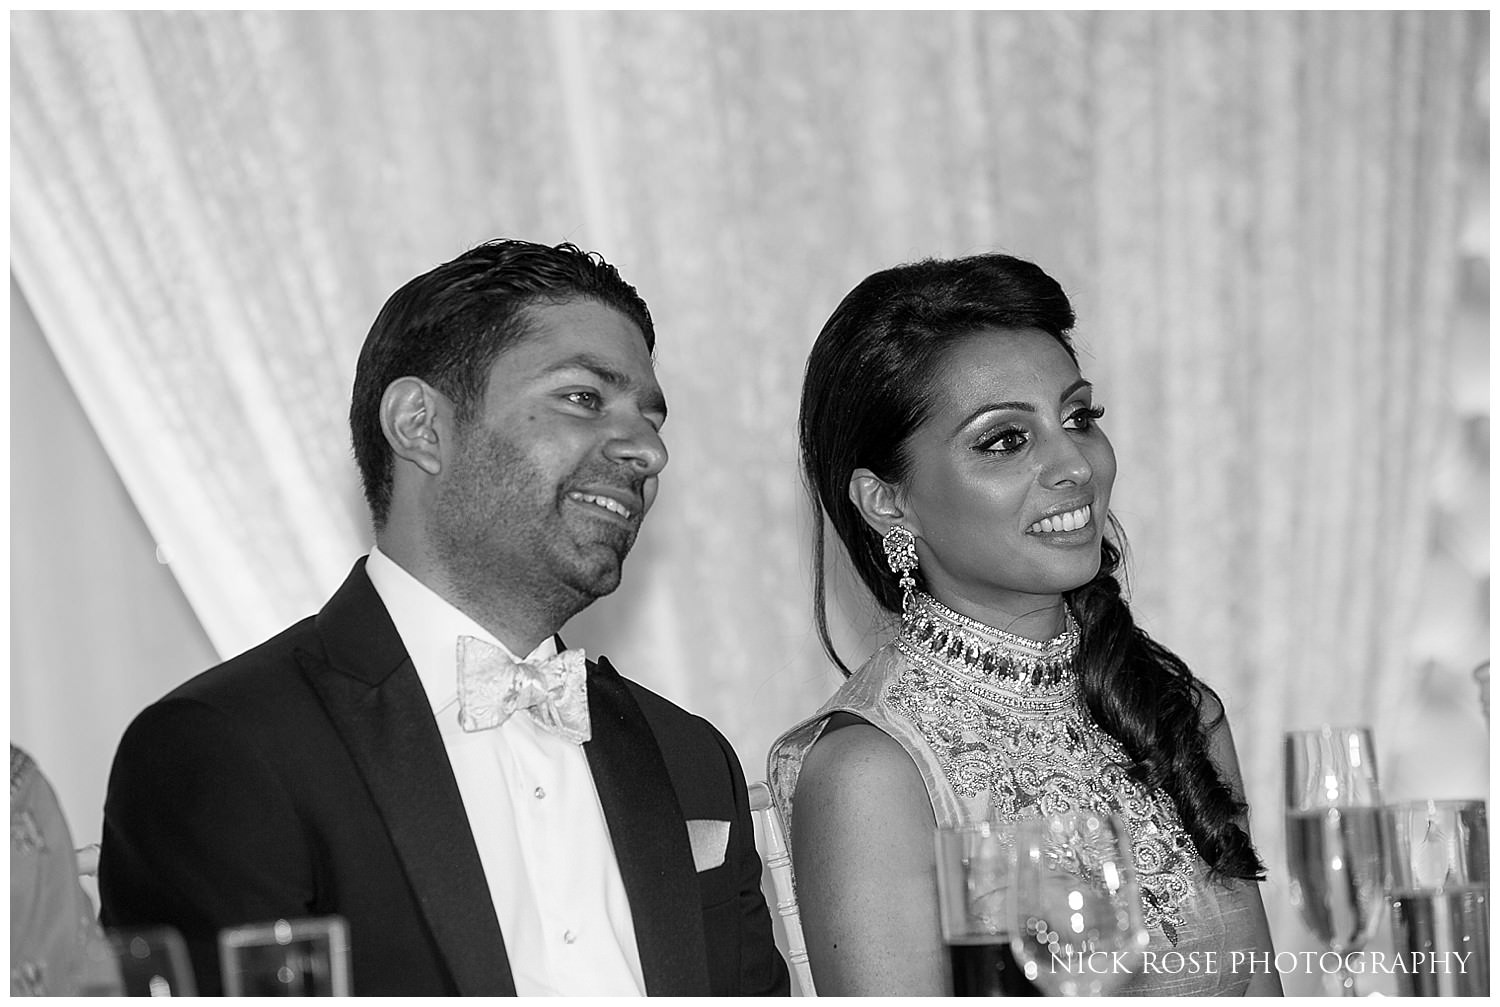  Couple listening to speeches during an Indian wedding reception in Canary Wharf London 